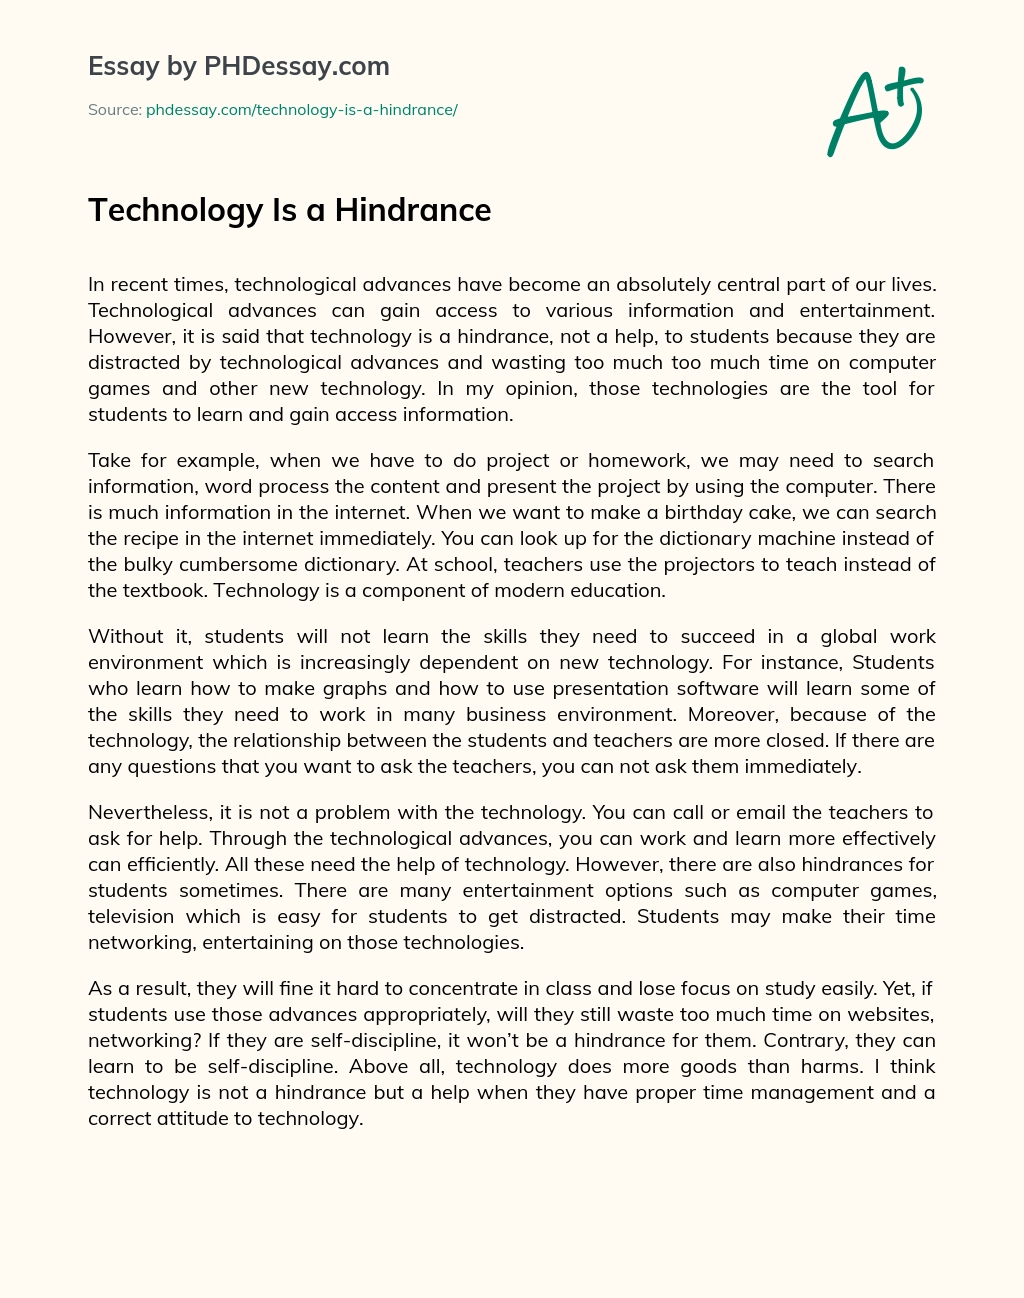 Technology Is a Hindrance essay